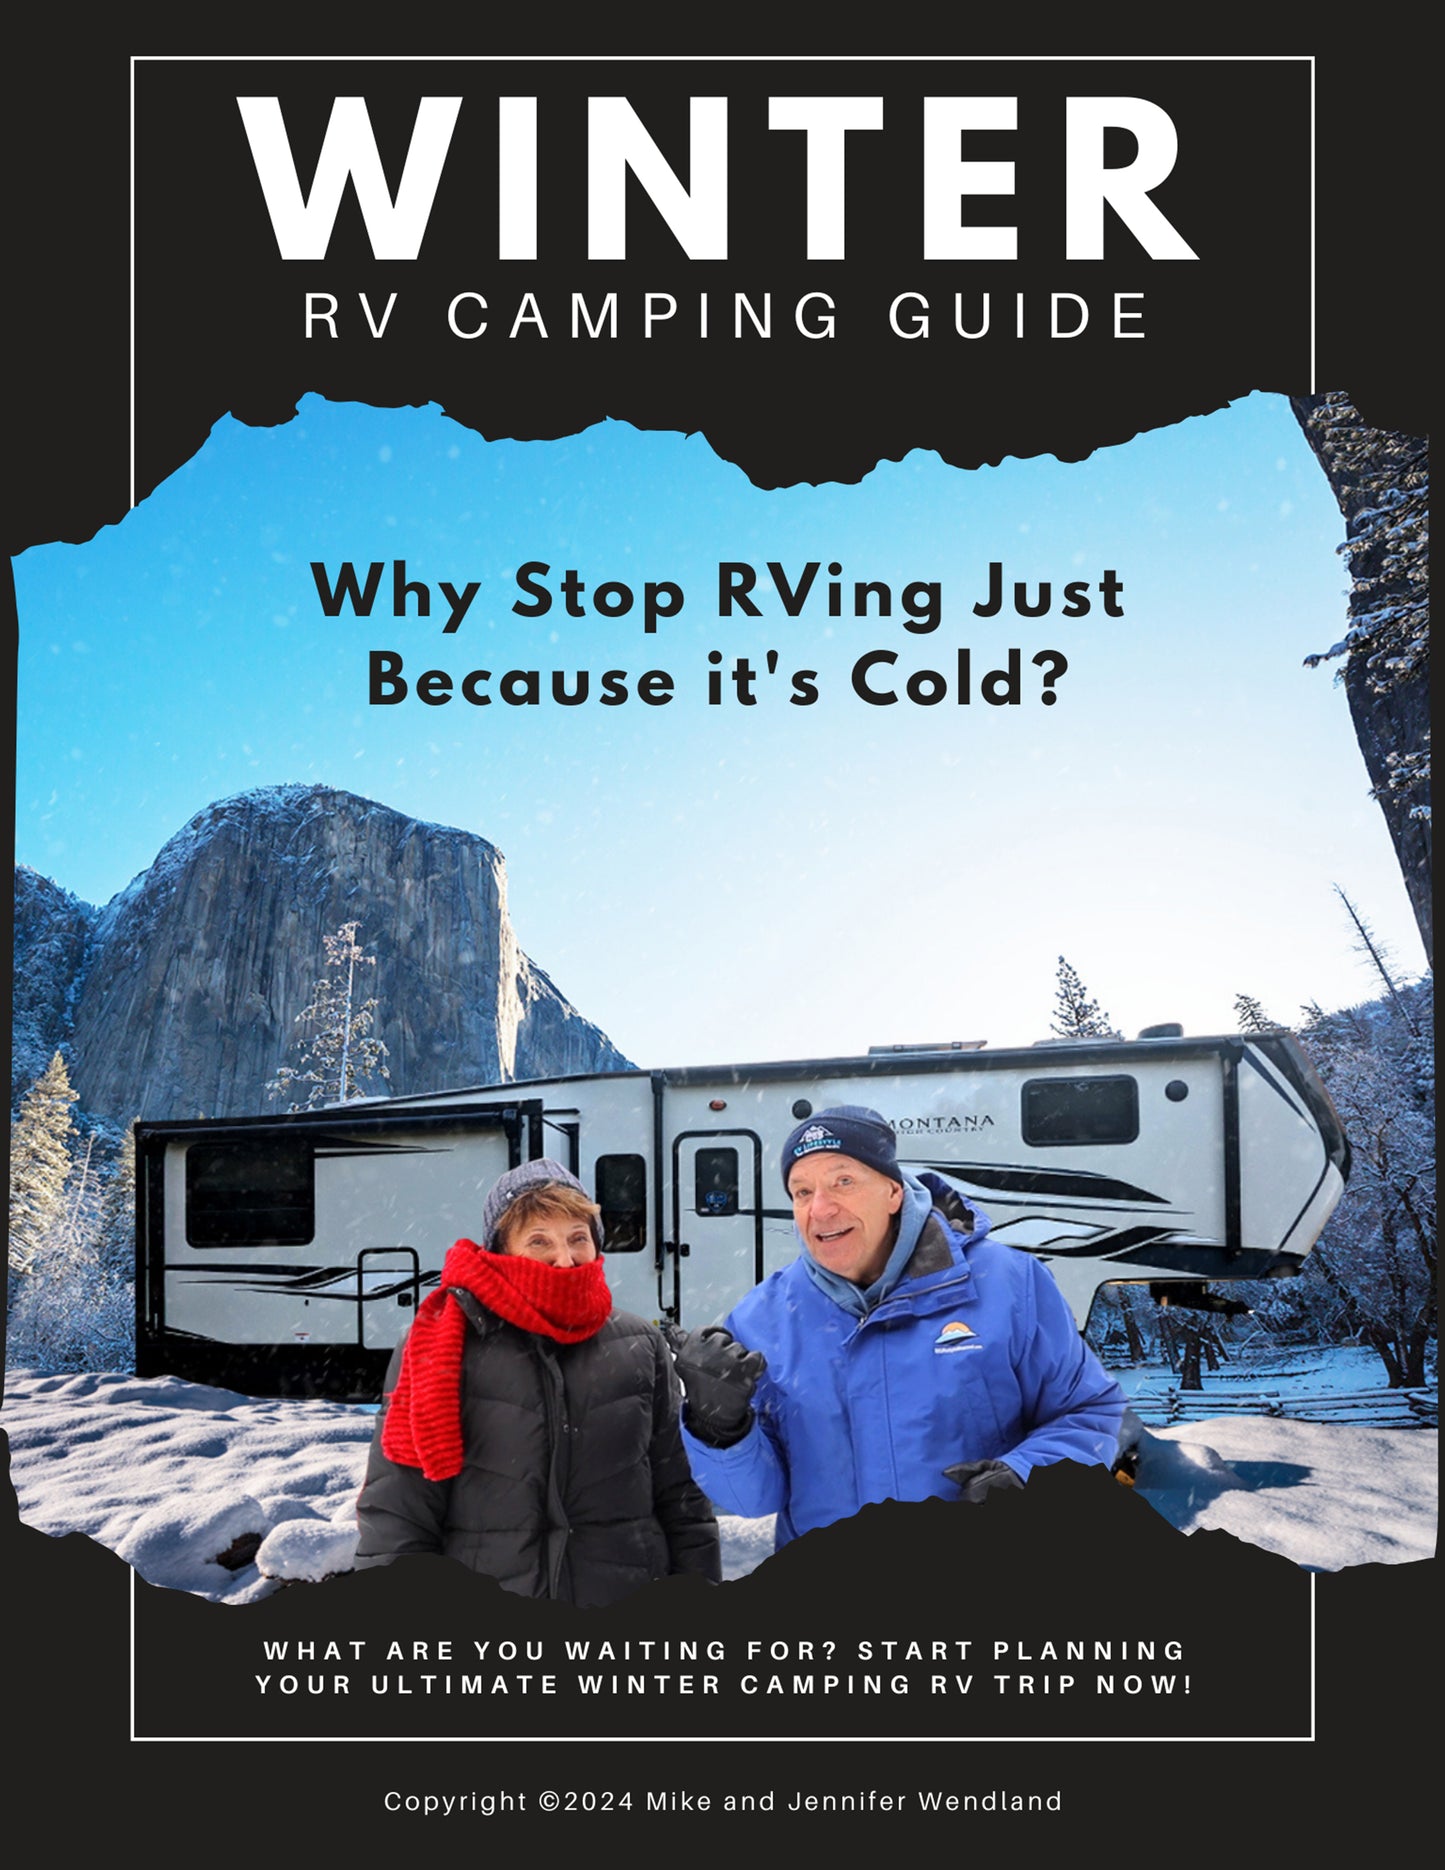 Winter RV Camping Guide - Why Stop RVing Just Because it's Cold?